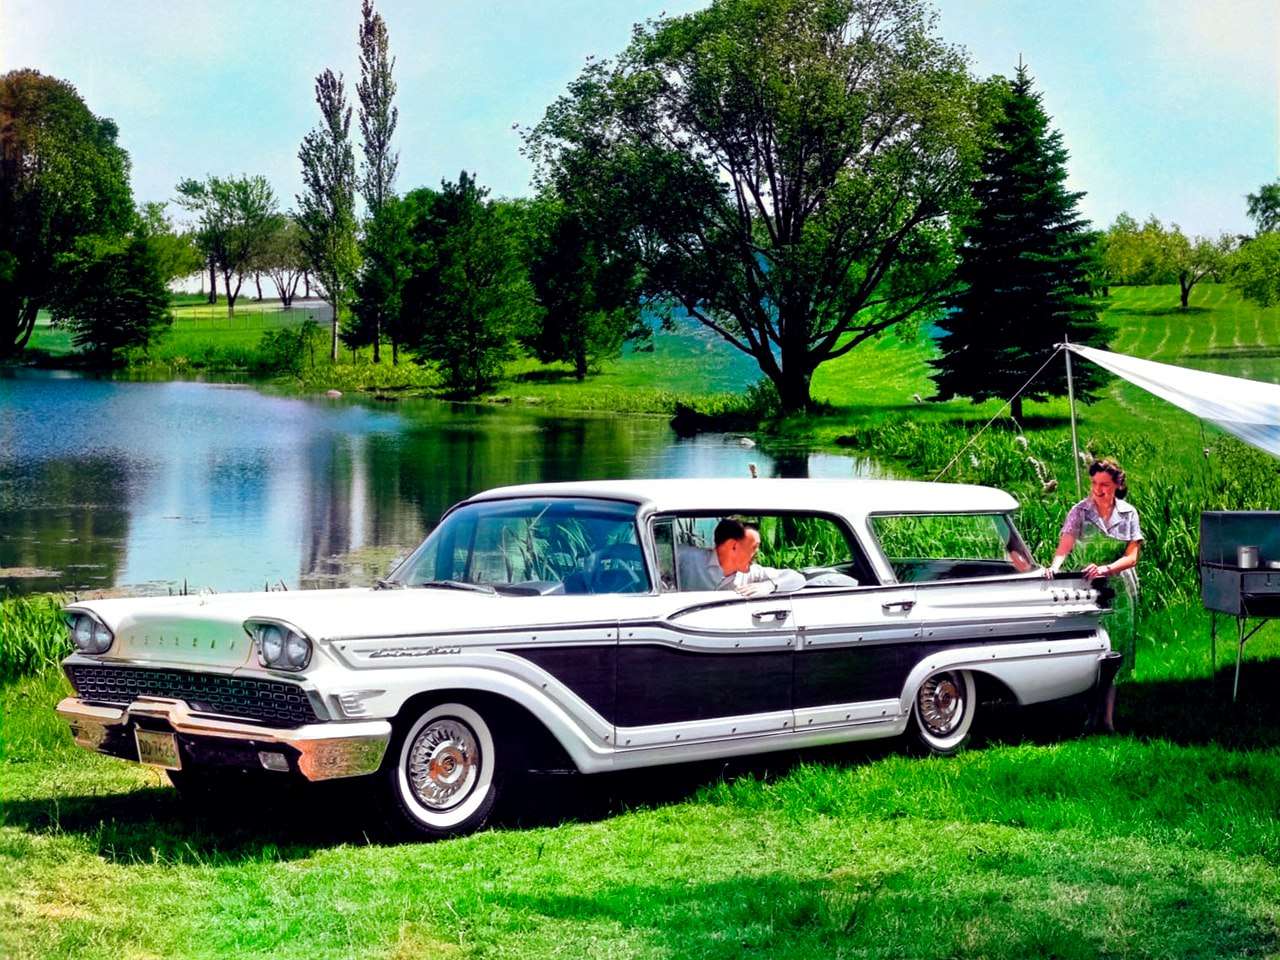 1959 Mercury Country Cruiser Colony Park Online-Puzzle